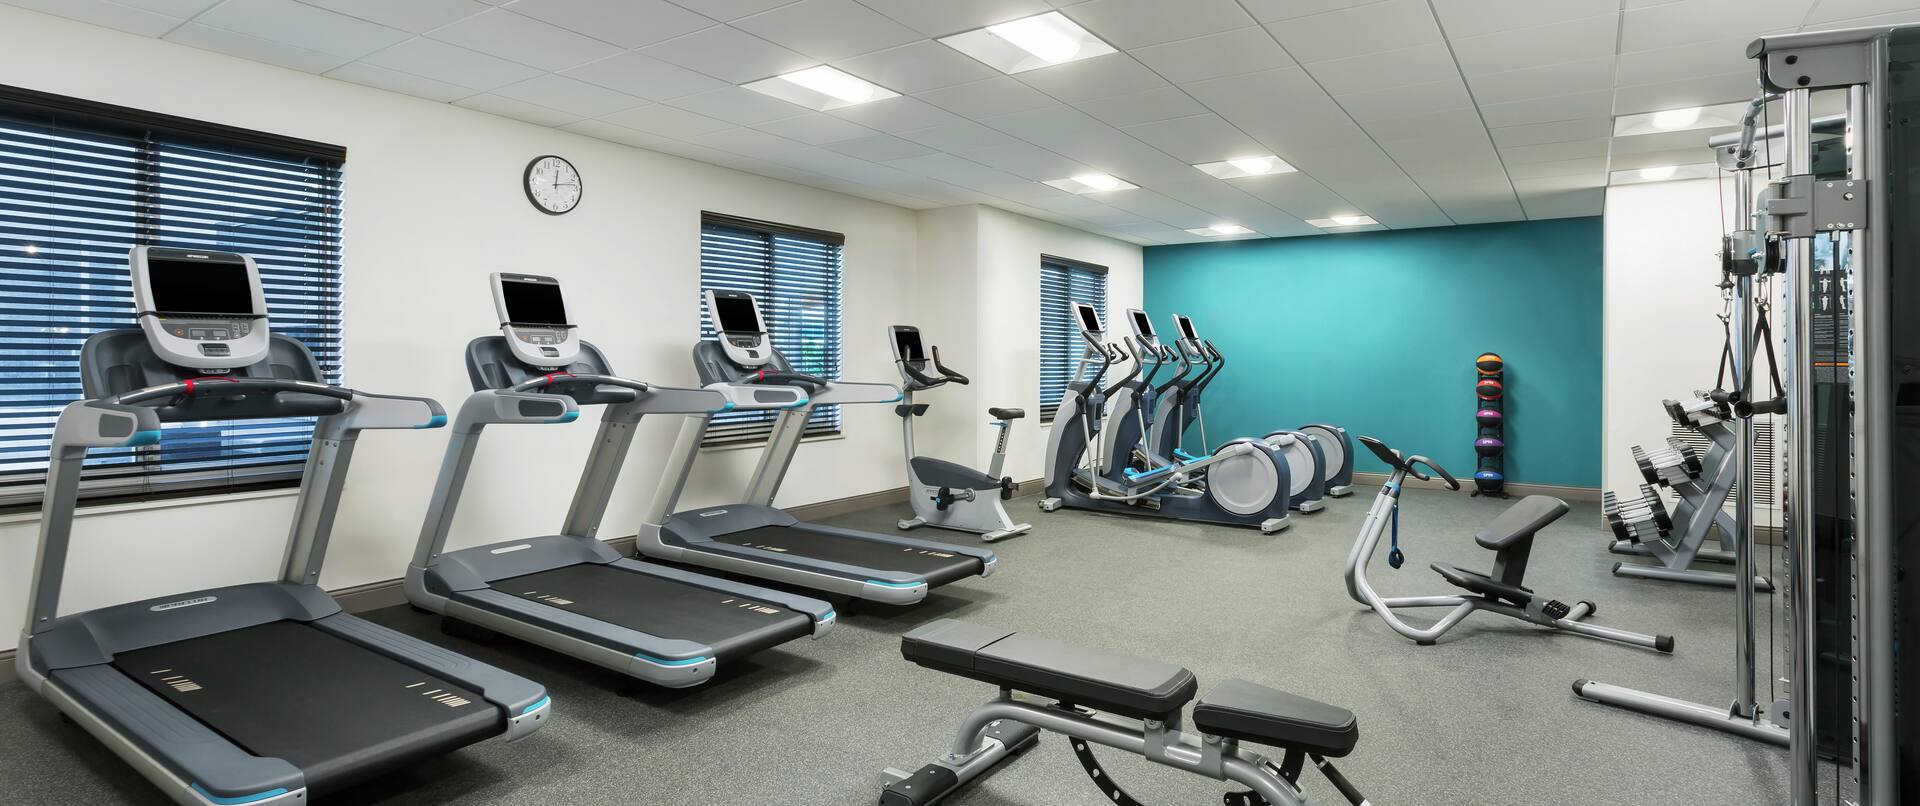 Cardio Machines and Equipment in Fitness Center